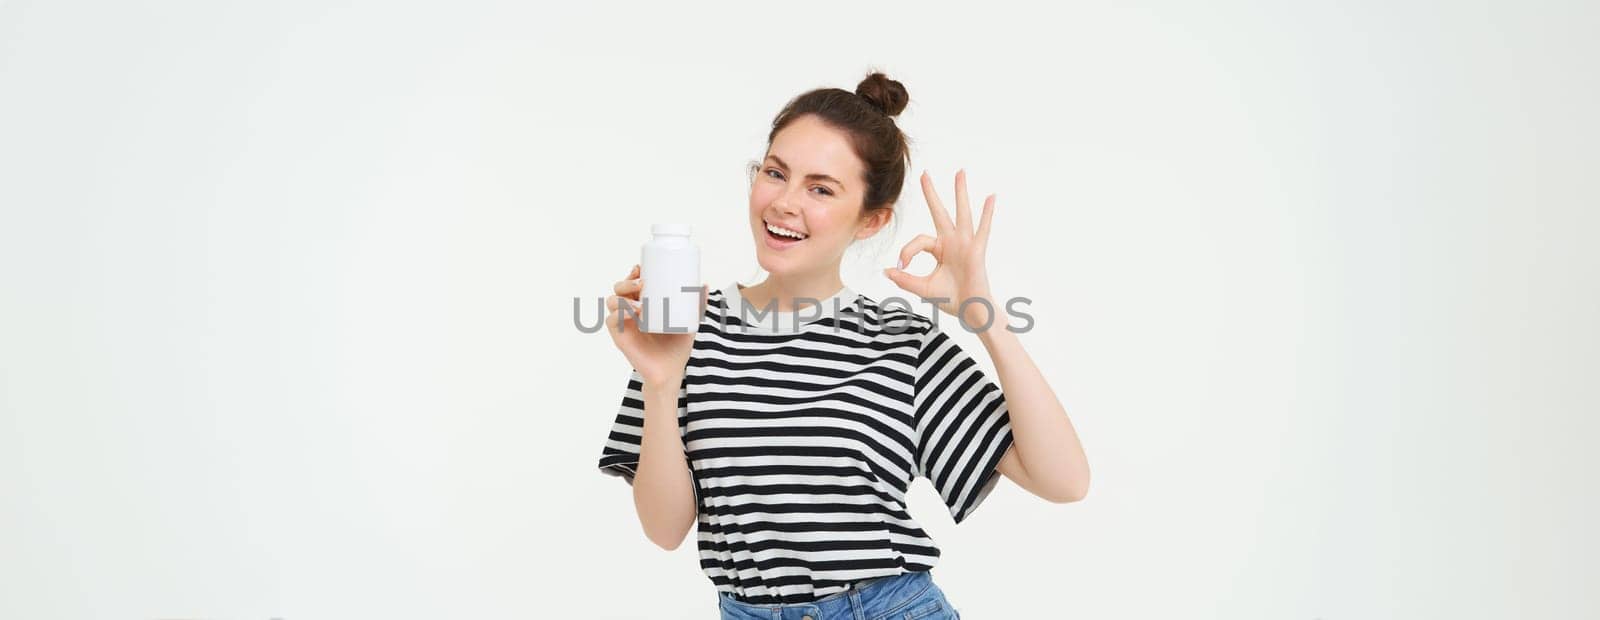 Image of smiling girl recommends dietary supplement, bottle with vitamin c, fish oil treatment, stands over white background.